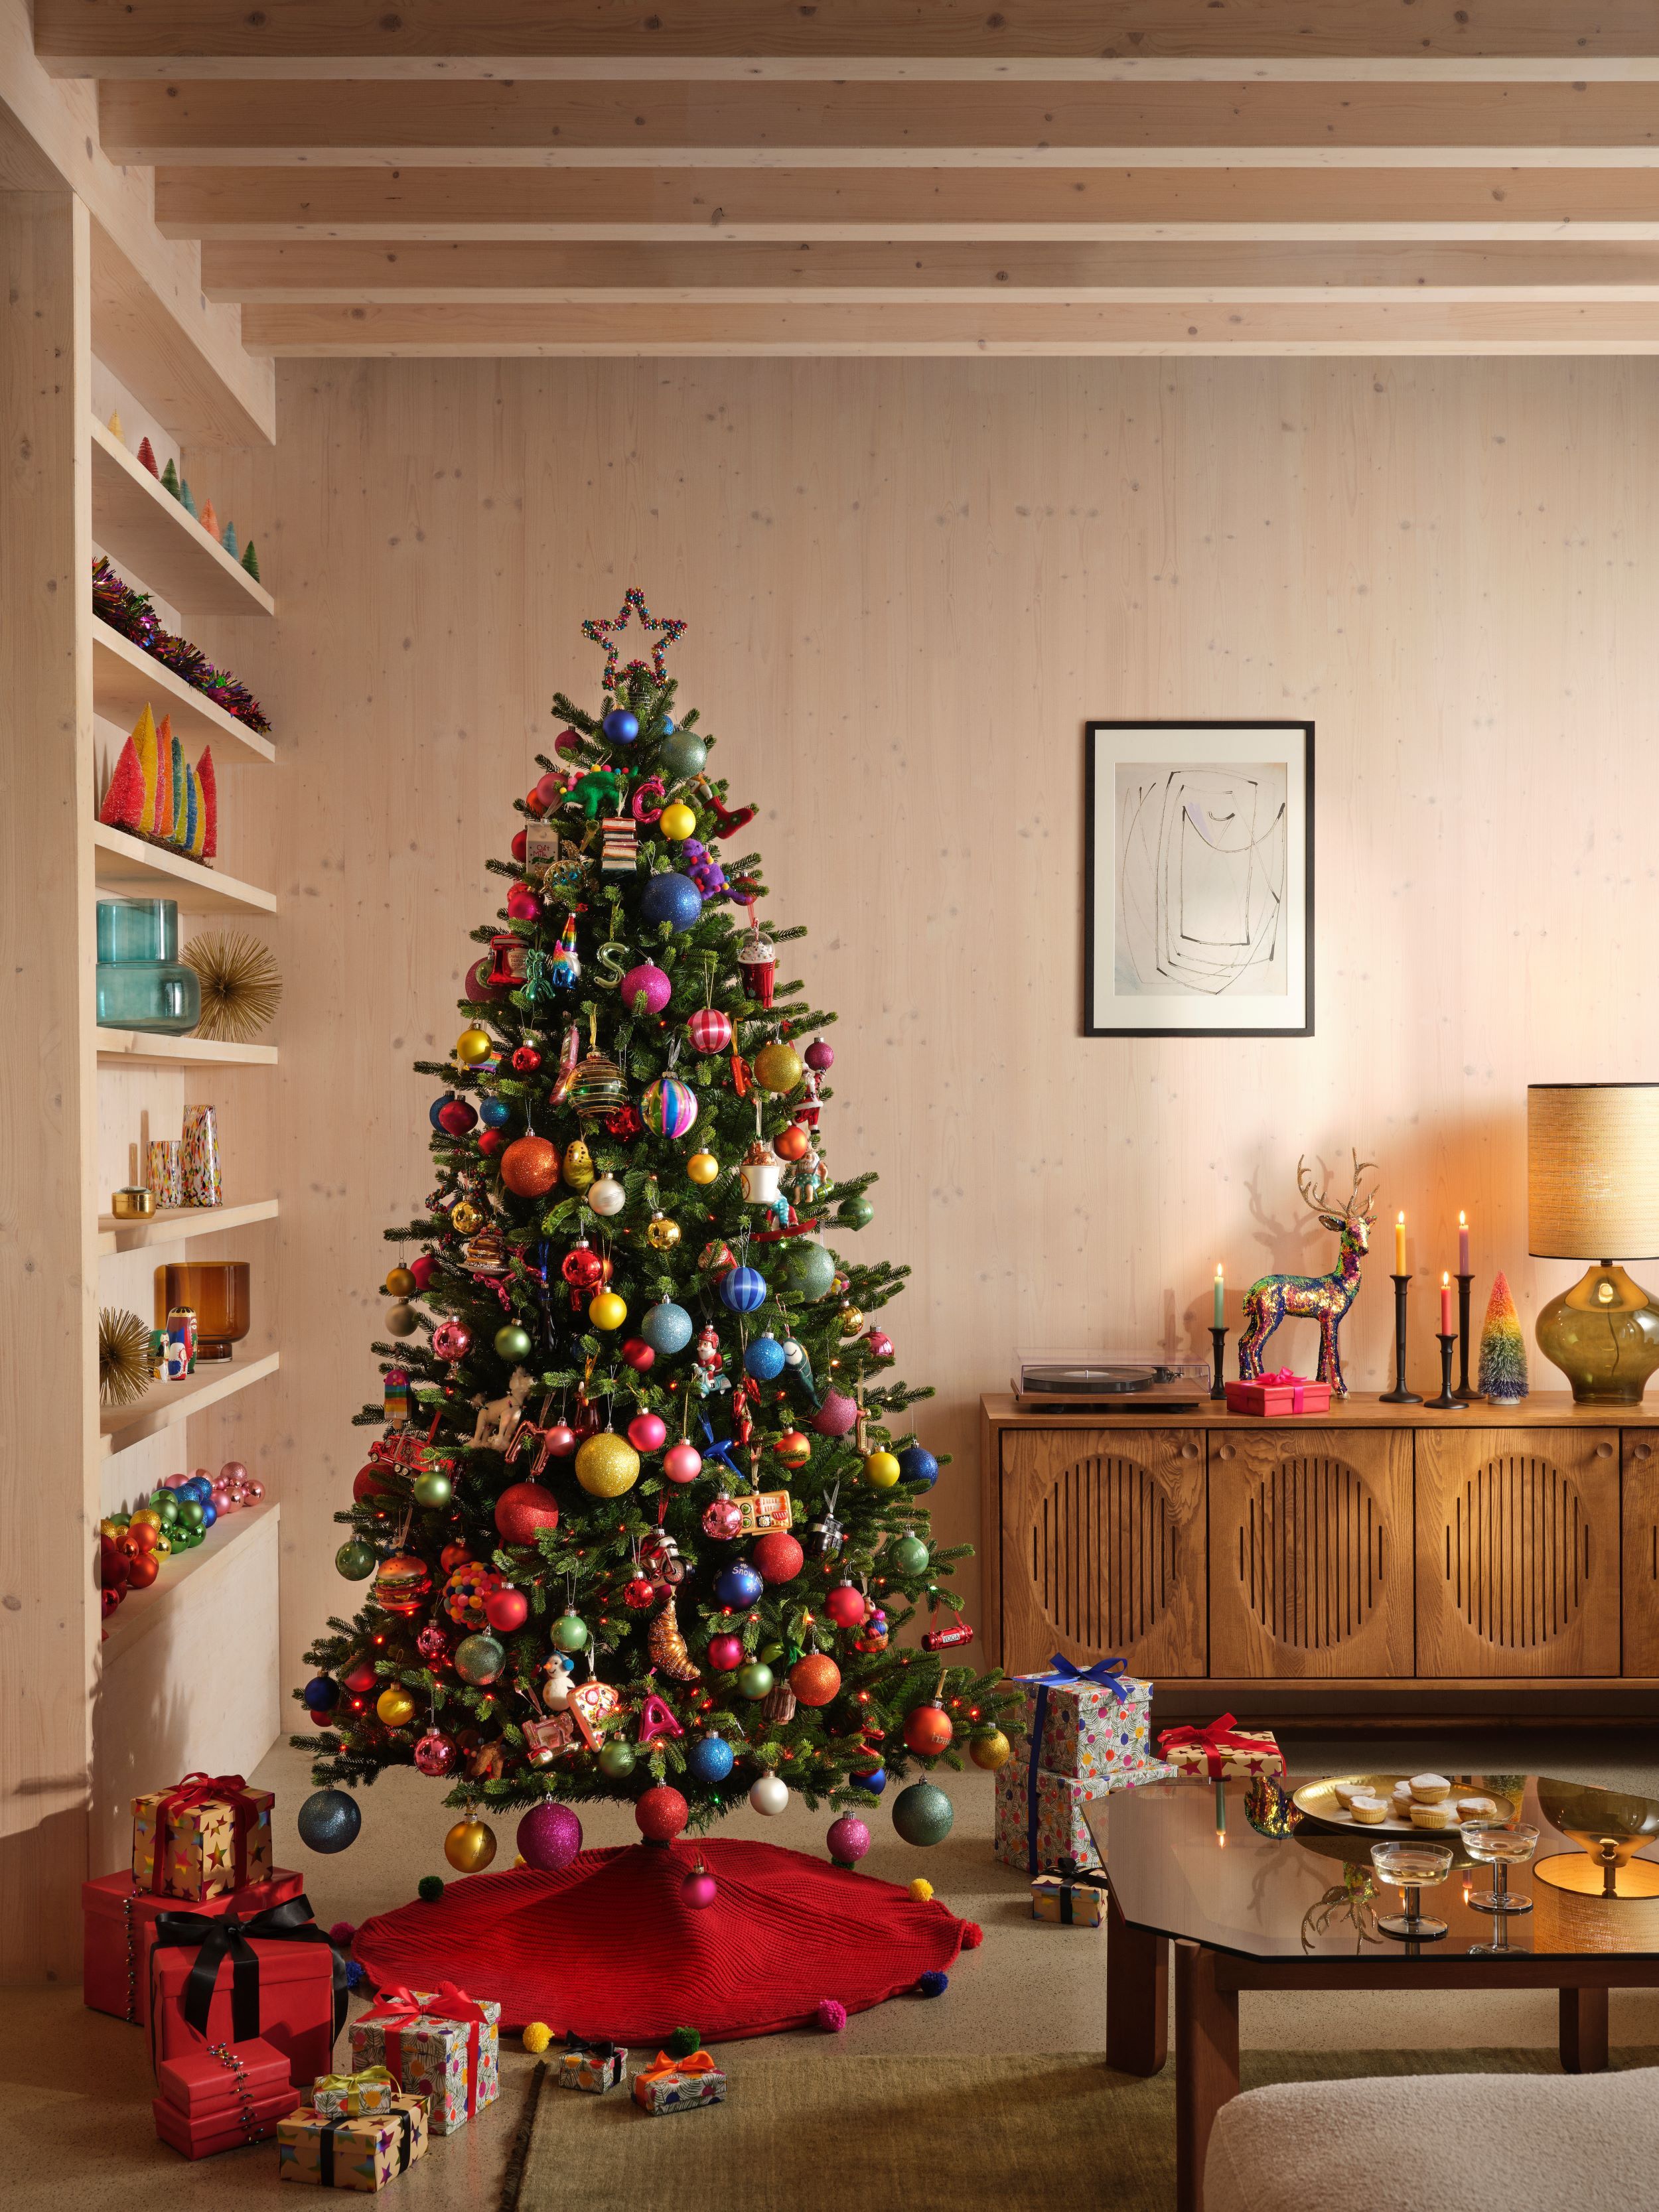 Browse christmas decorations at john lewis for elegant and timeless holiday décor